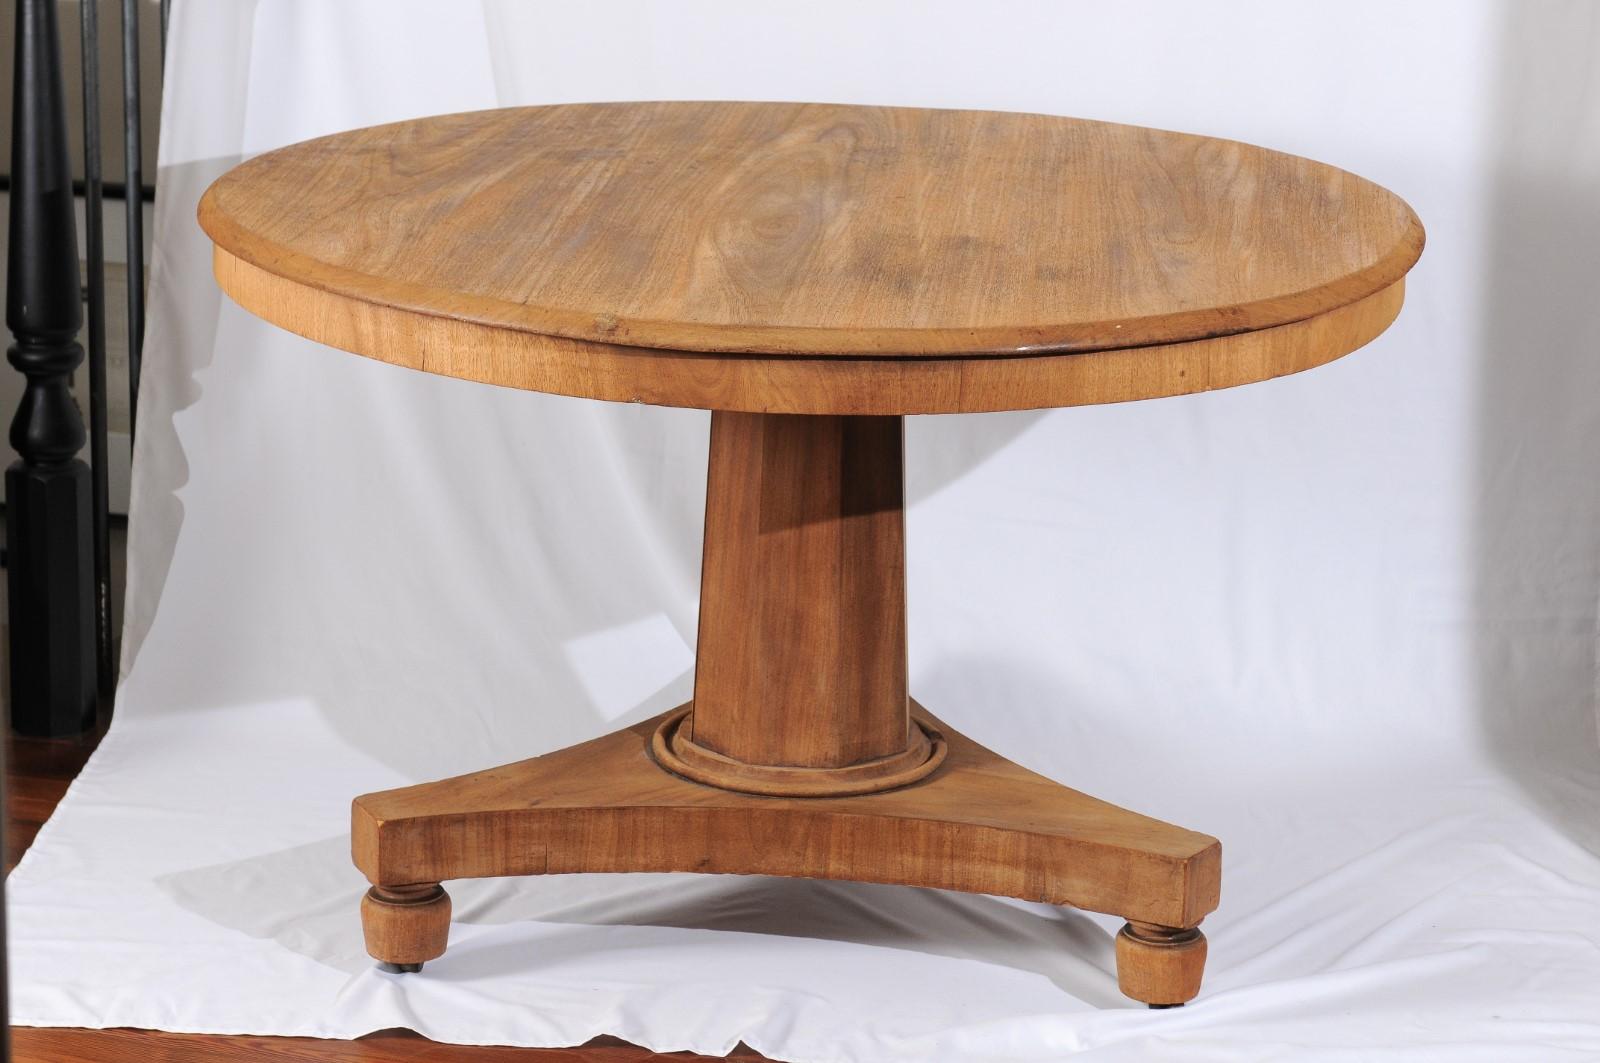 A 19th century Biedermeir-style round pedestal dining or center table featuring a round top overhanging a center pedestal with a tripod base over bulbous feet. A clear oak finish. European. Measure: 47